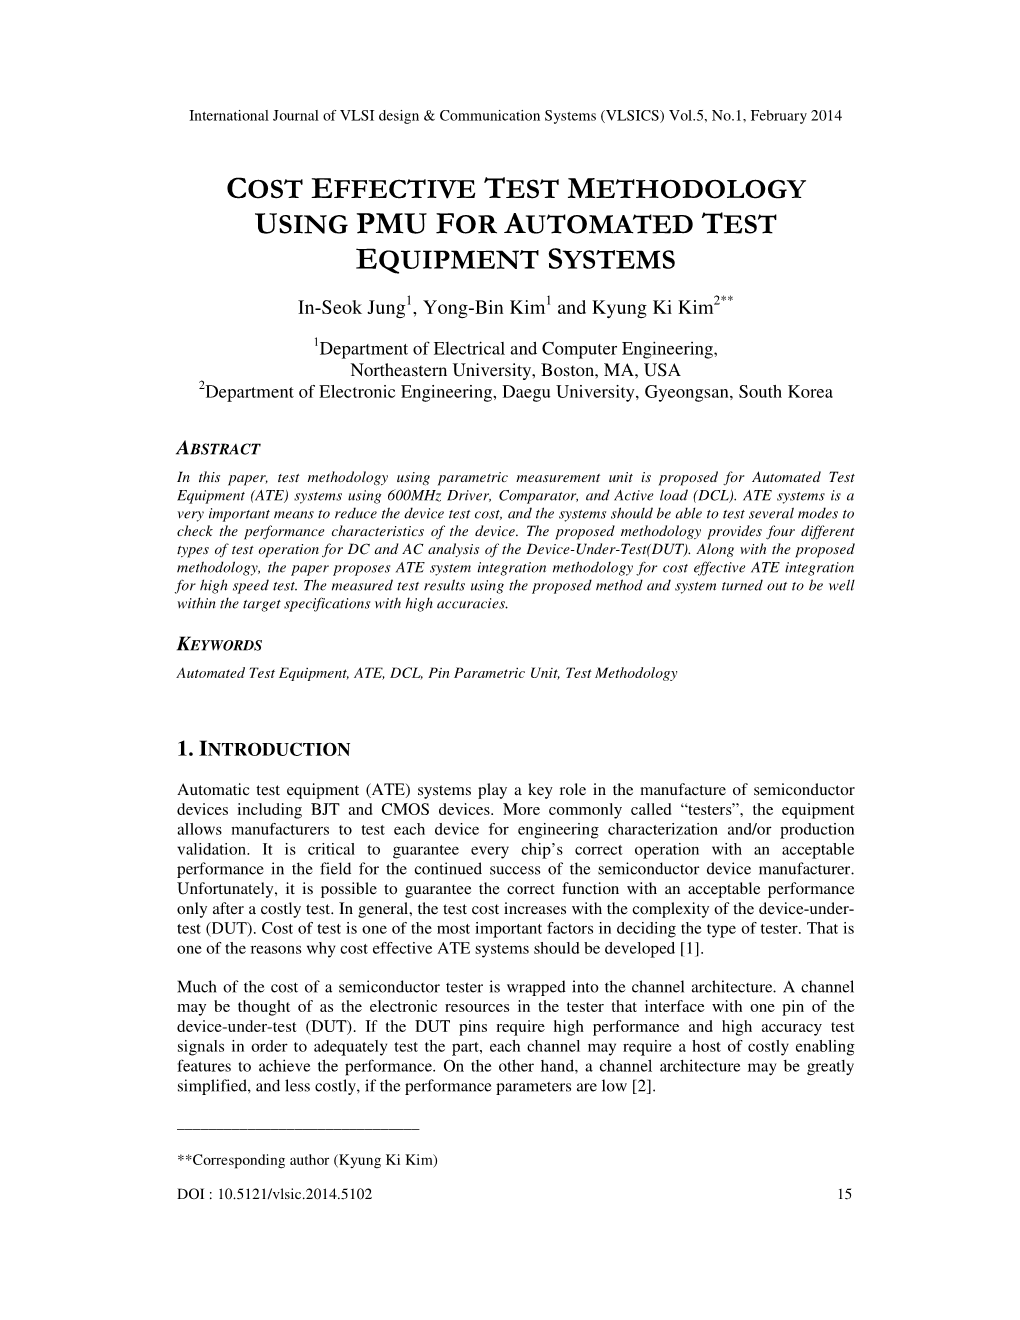 Cost Effective Test Methodology Using Pmu for Automated Test Equipment Systems